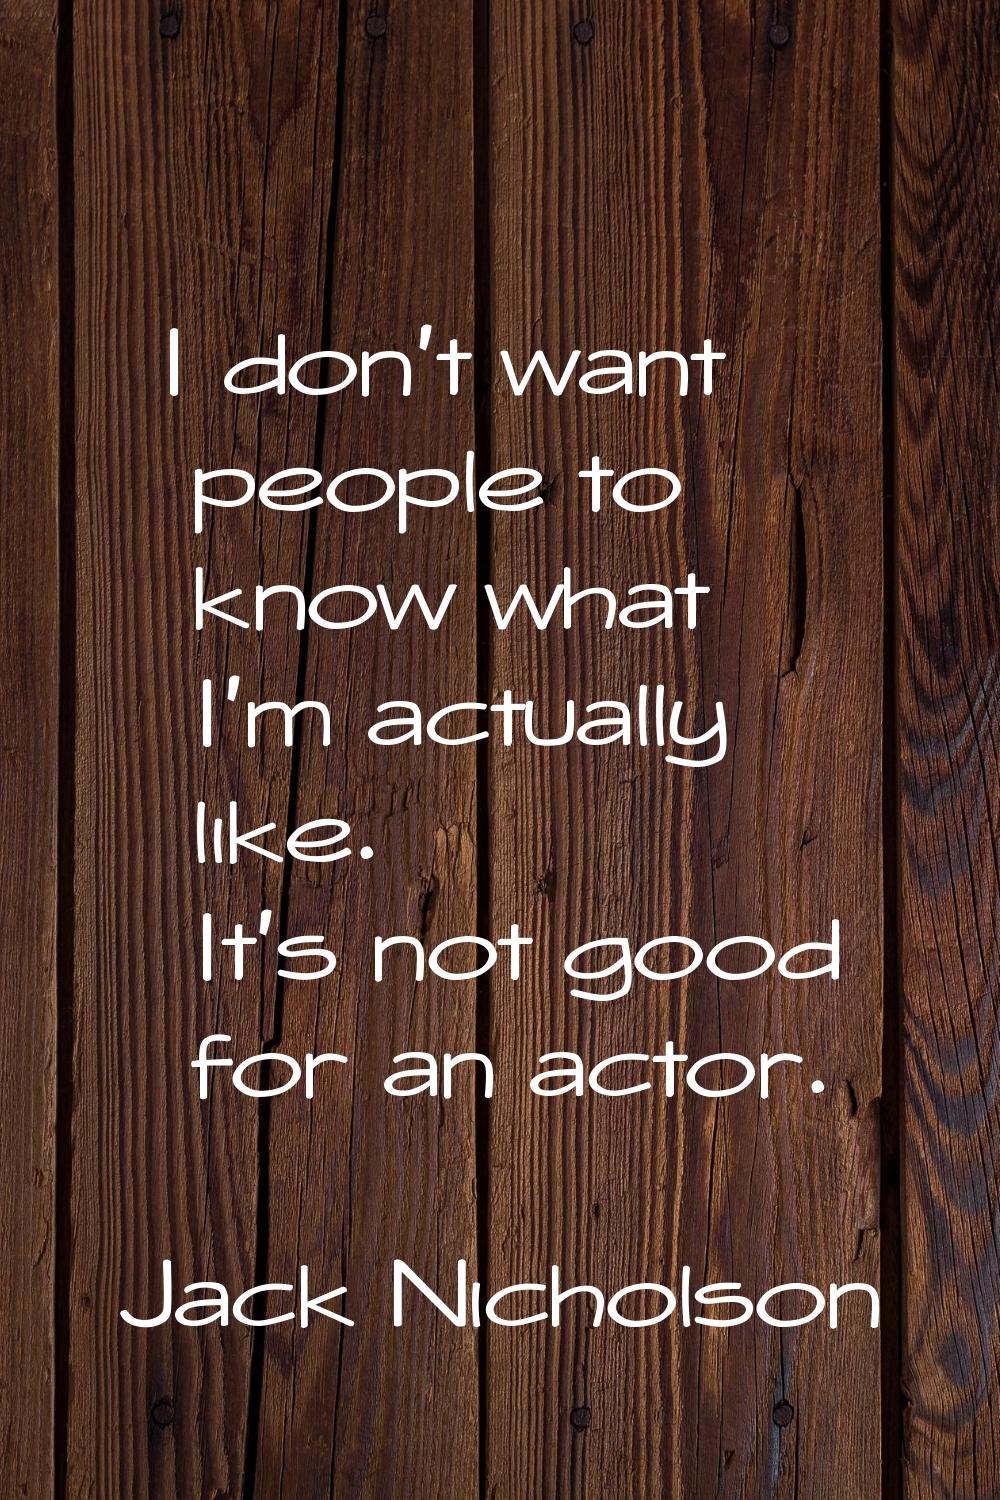 I don't want people to know what I'm actually like. It's not good for an actor.